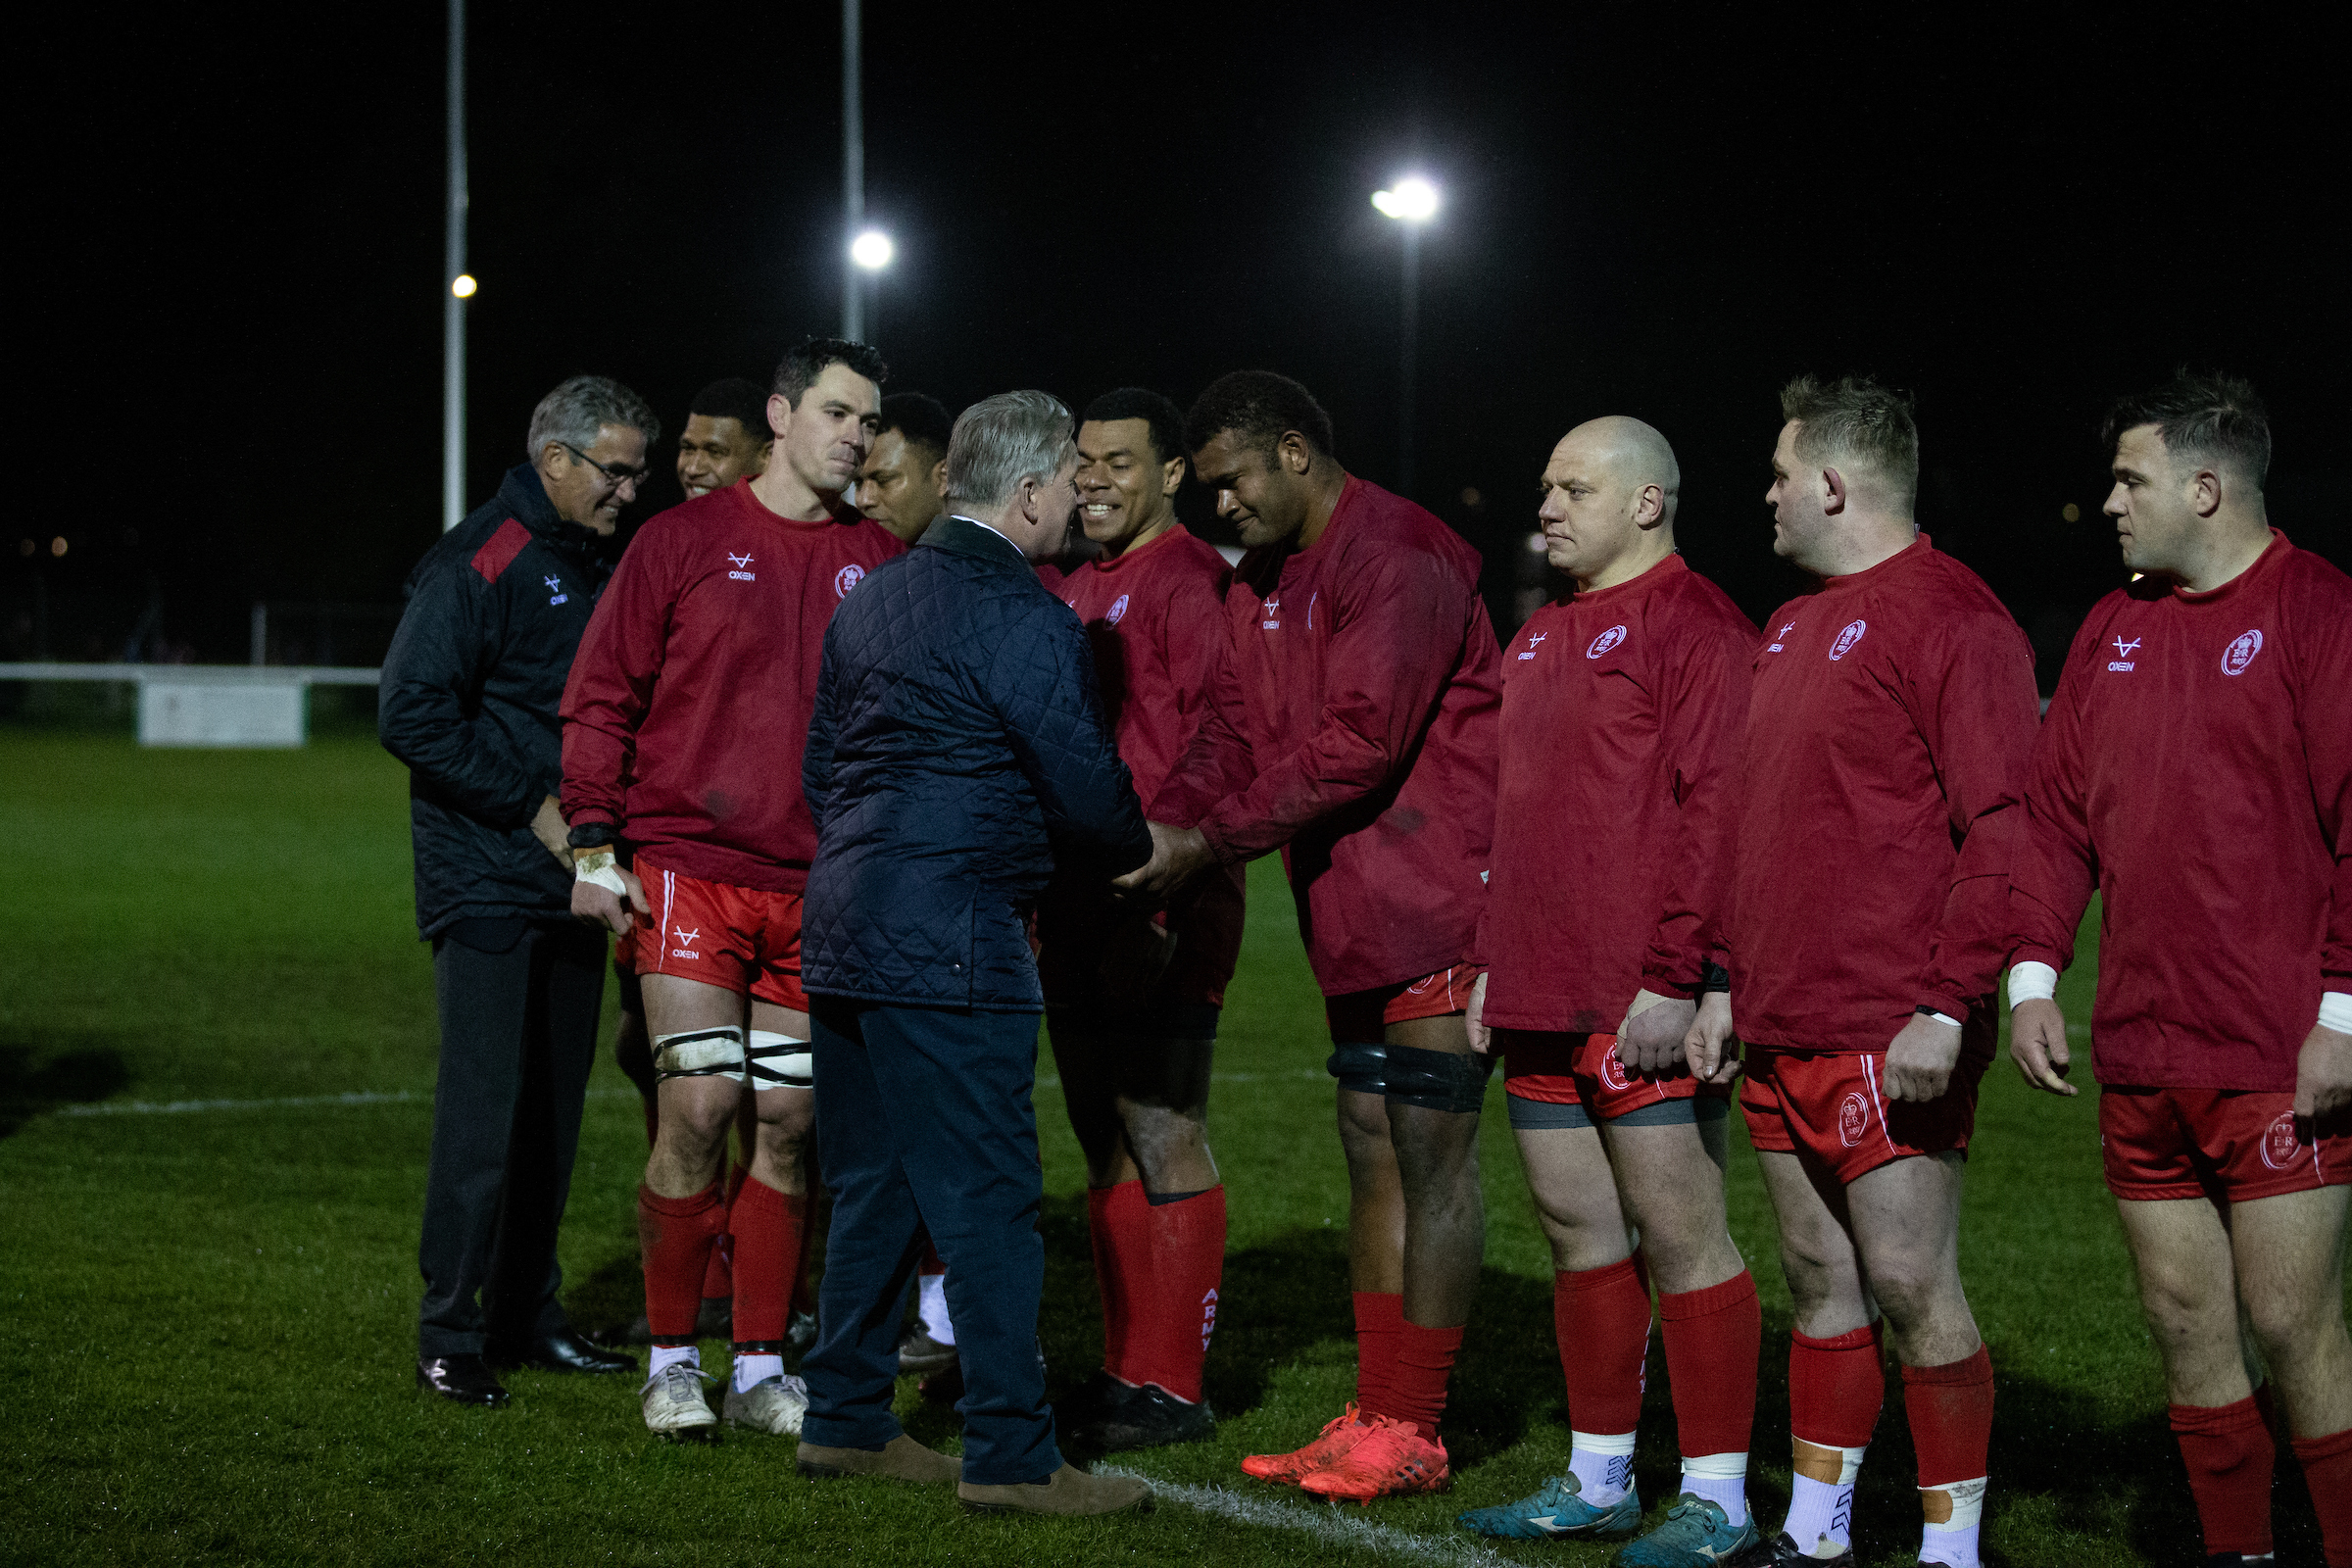 Osman relishing final Mobbs Memorial Match outing for red shirts